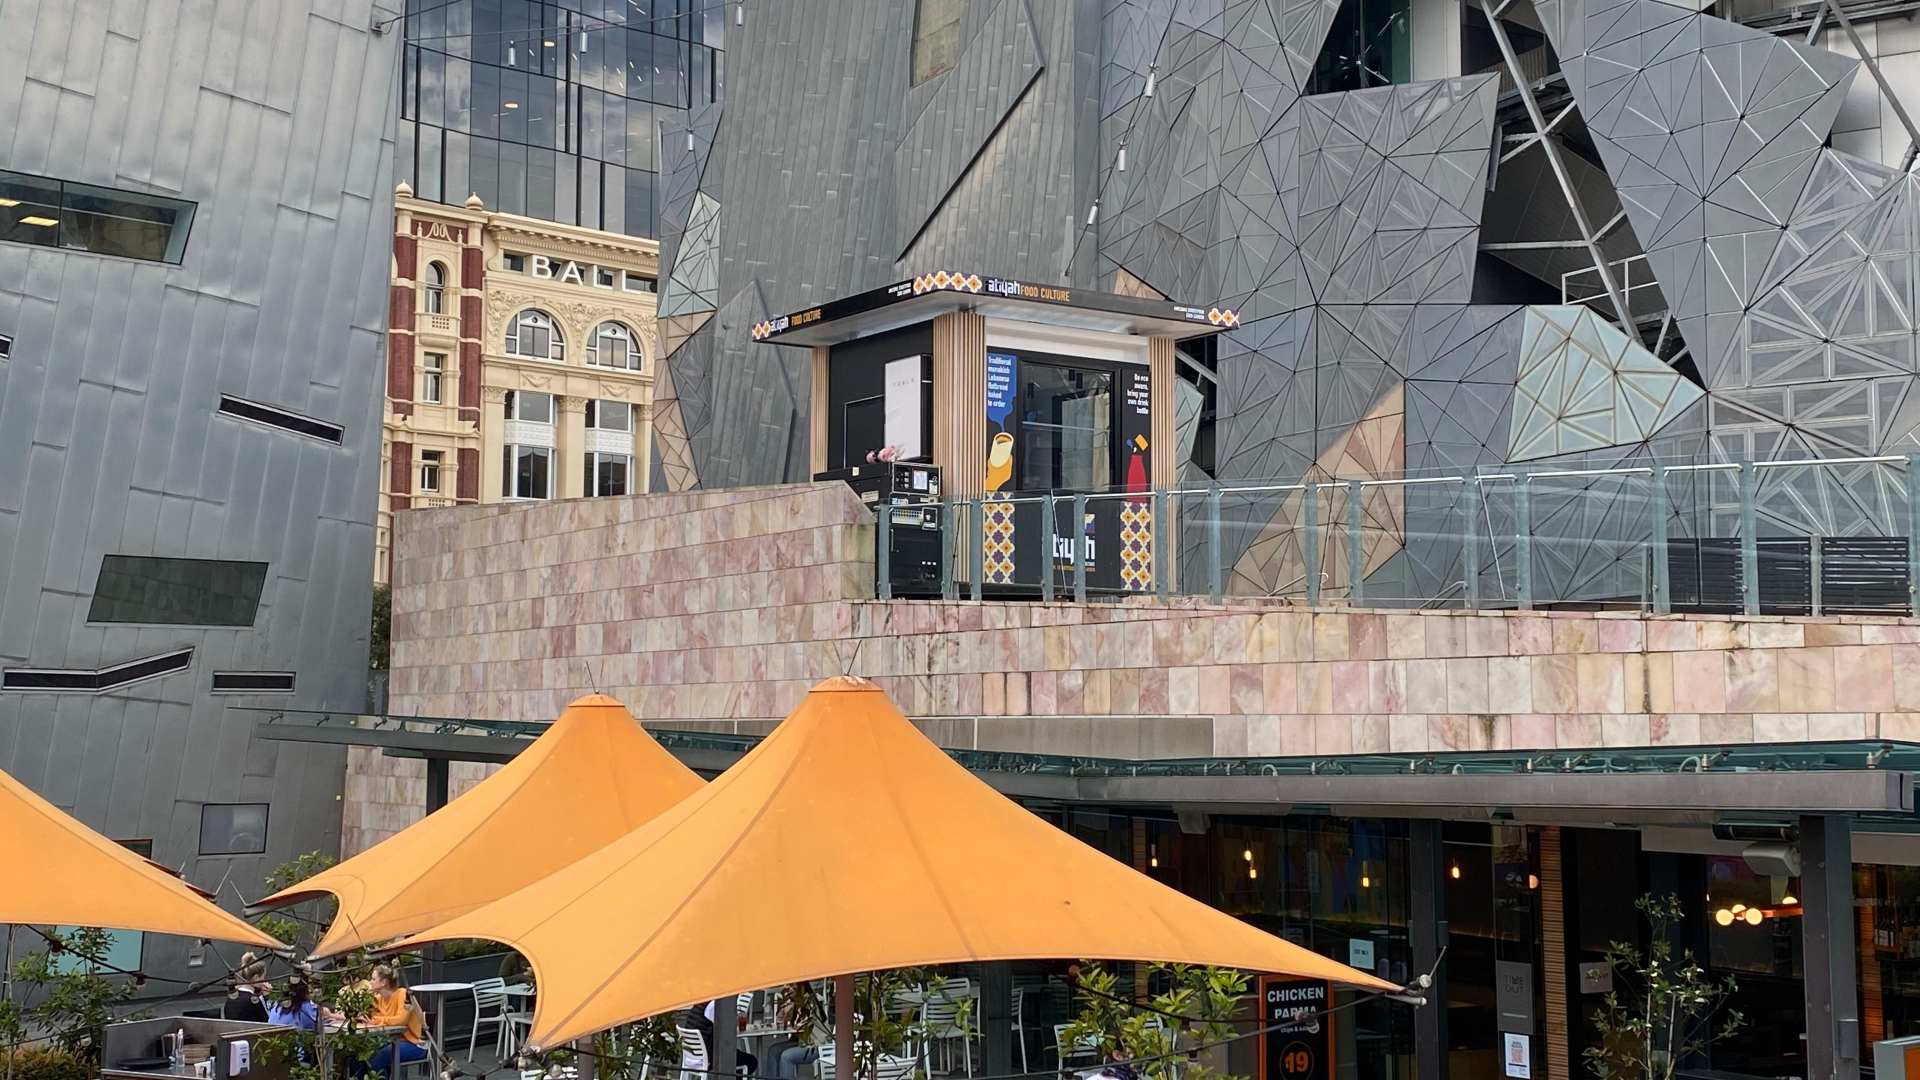 Federation Square Is Now Home to Australia's First Zero-Carbon Street Food Kitchen Atiyah